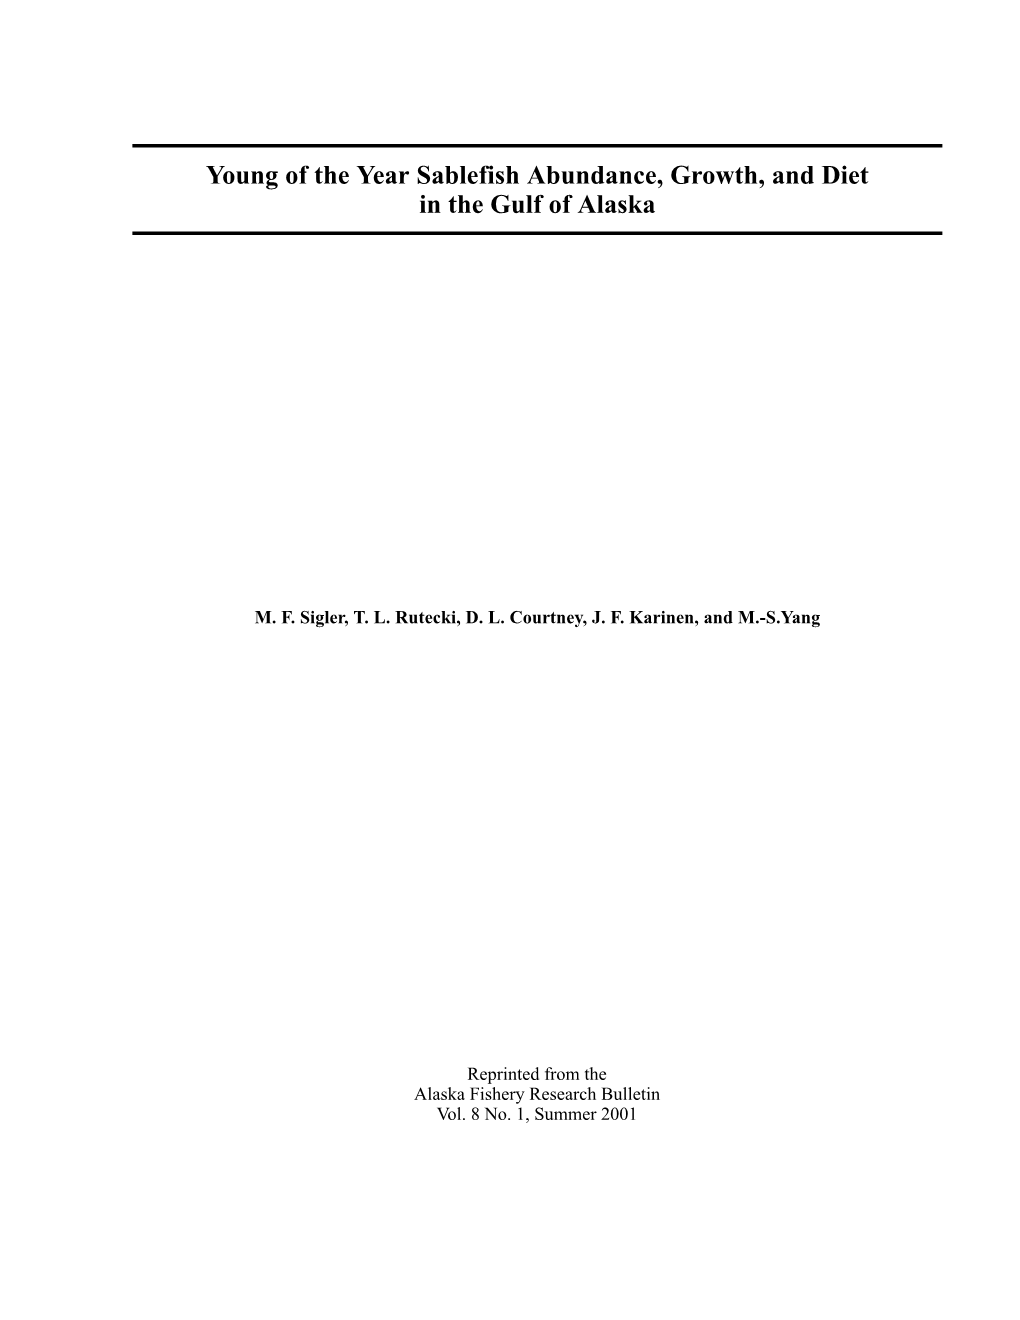 Young of the Year Sablefish Abundance, Growth, and Diet in the Gulf of Alaska